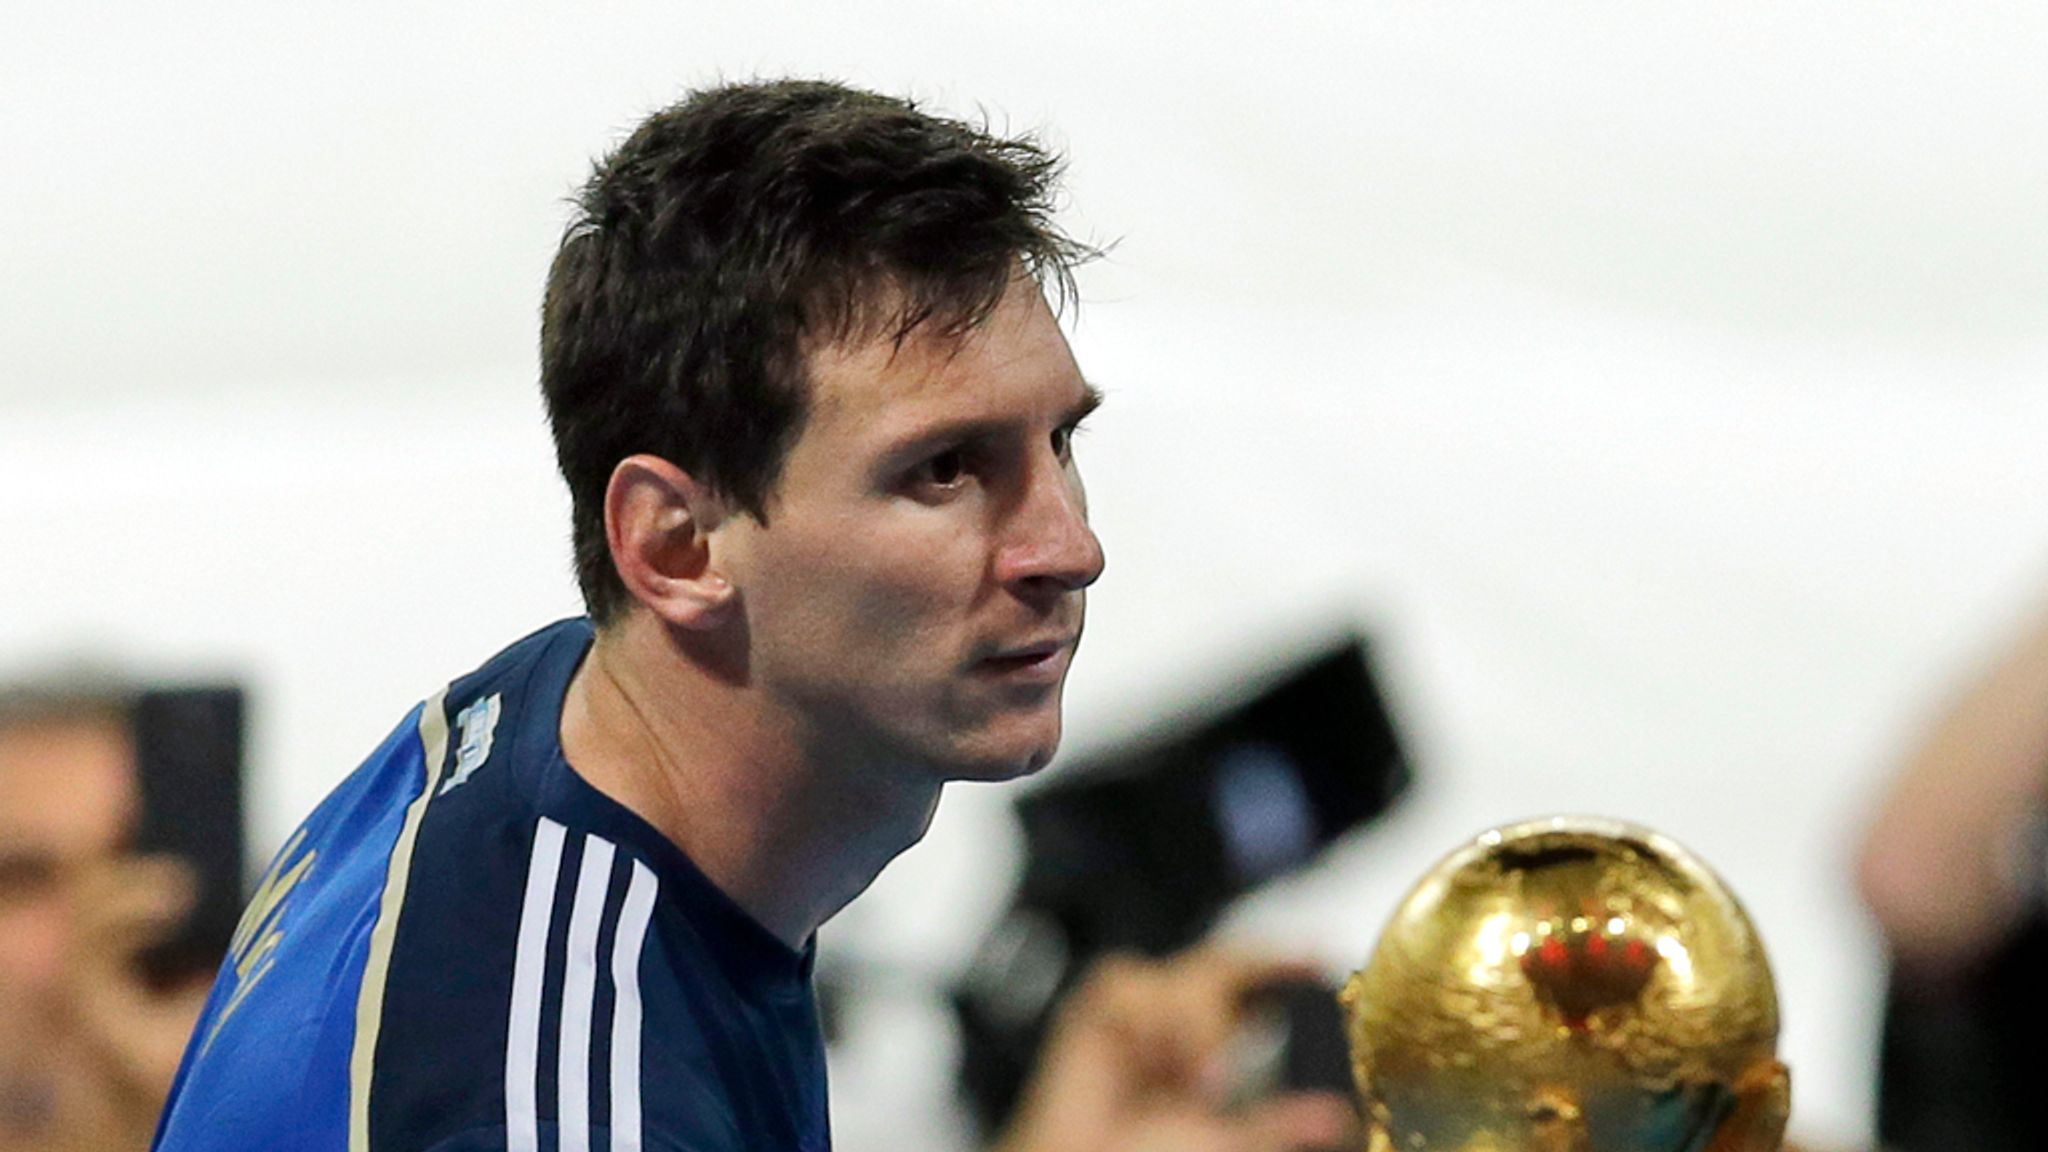 World Cup Final: Was Lionel Messi really a disappointment in Brazil or